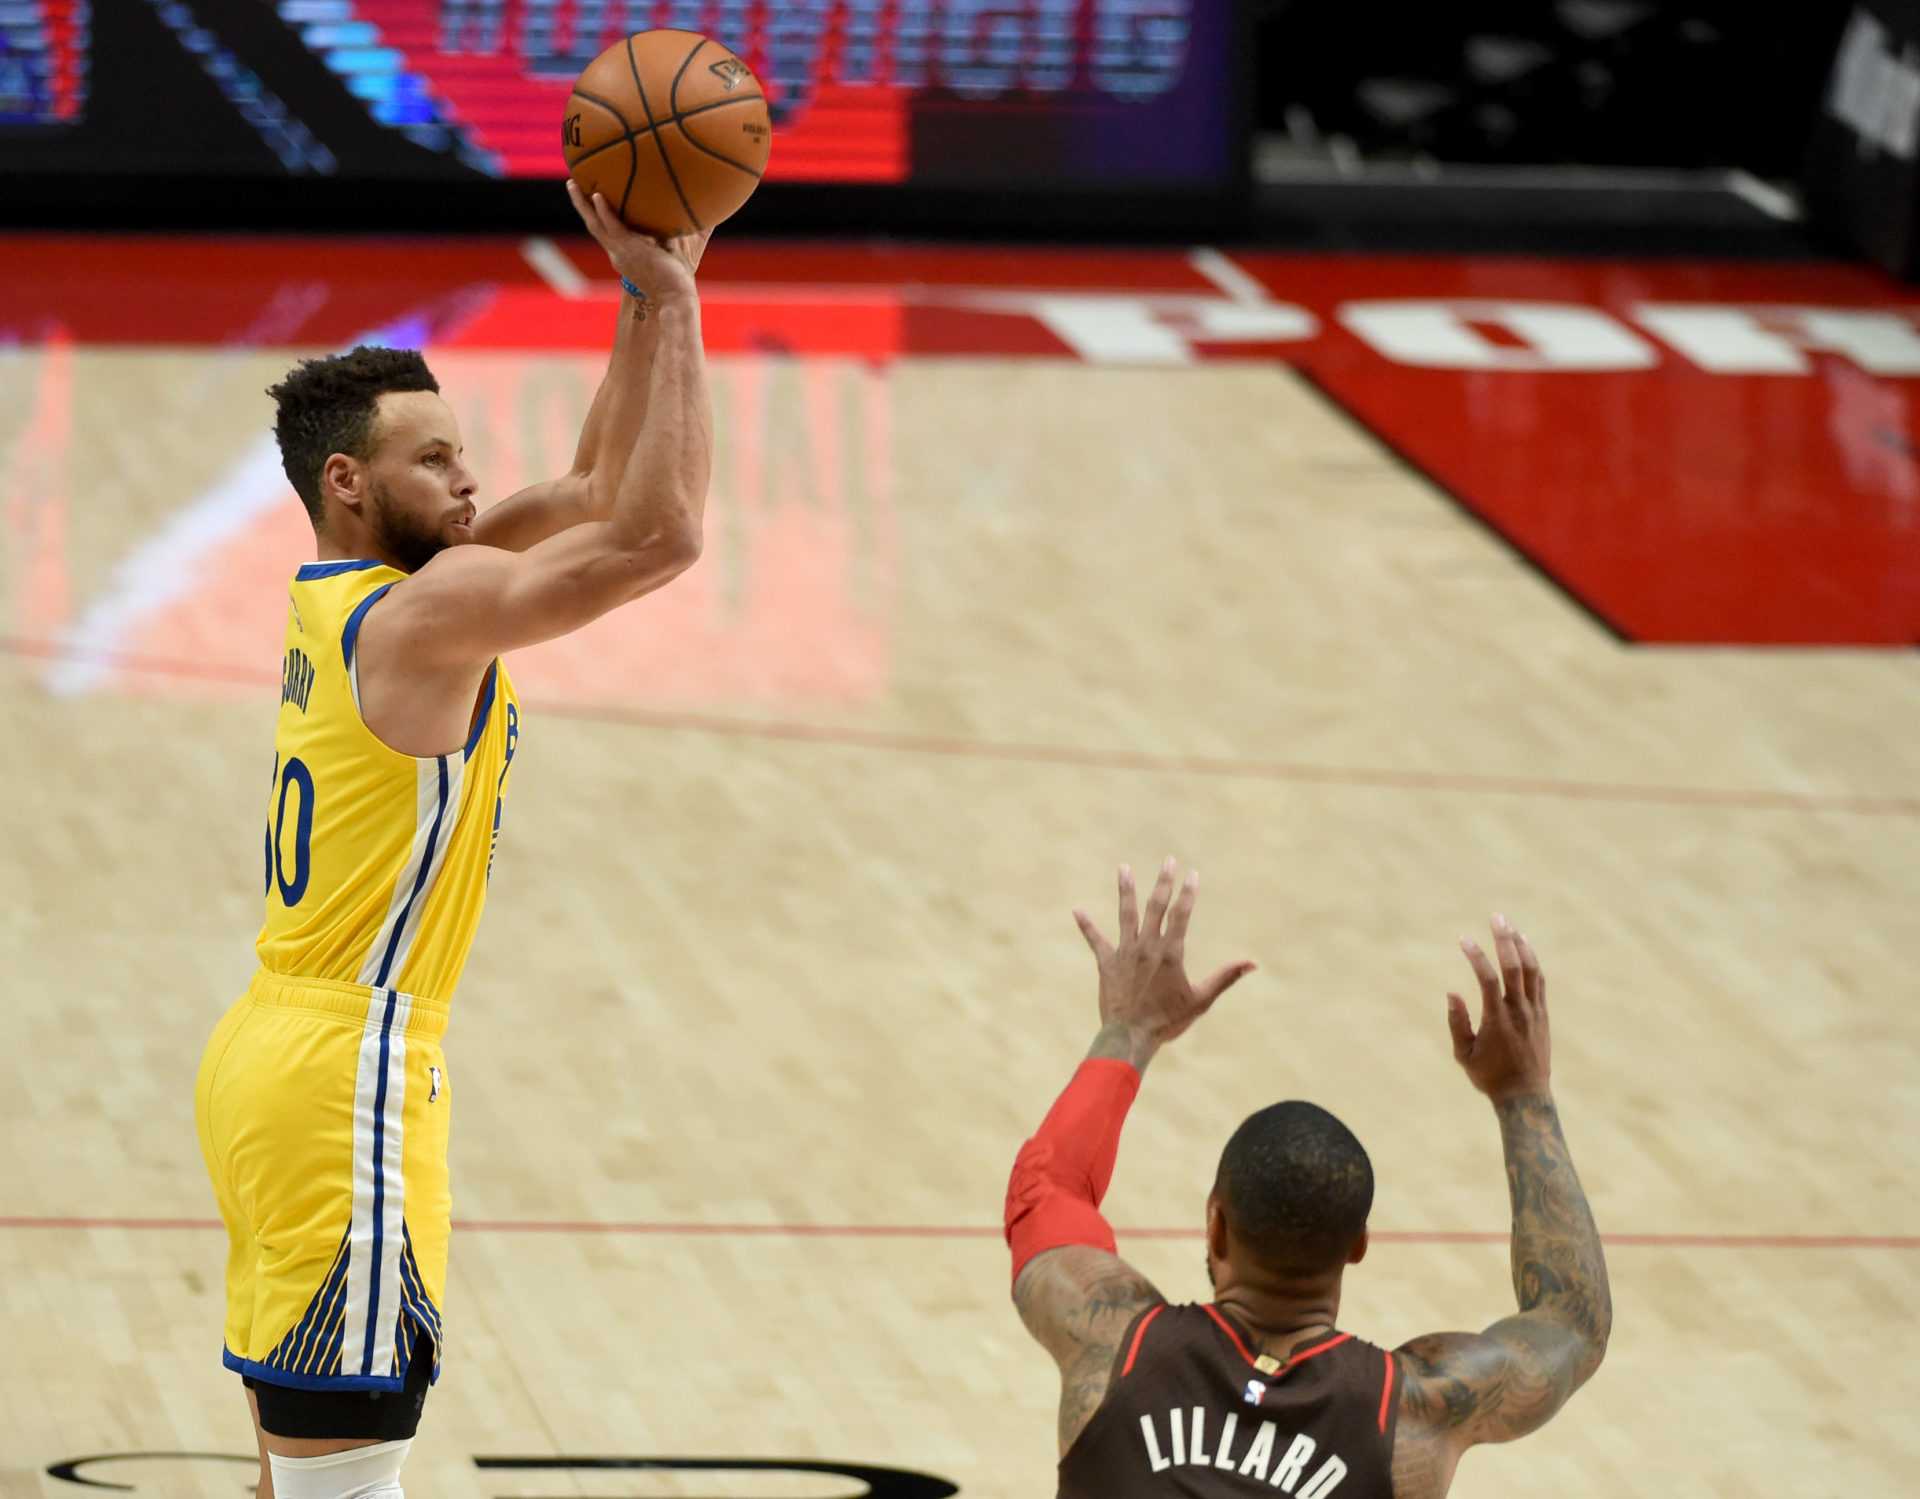 Steph Curry of Warriors vs Blazers